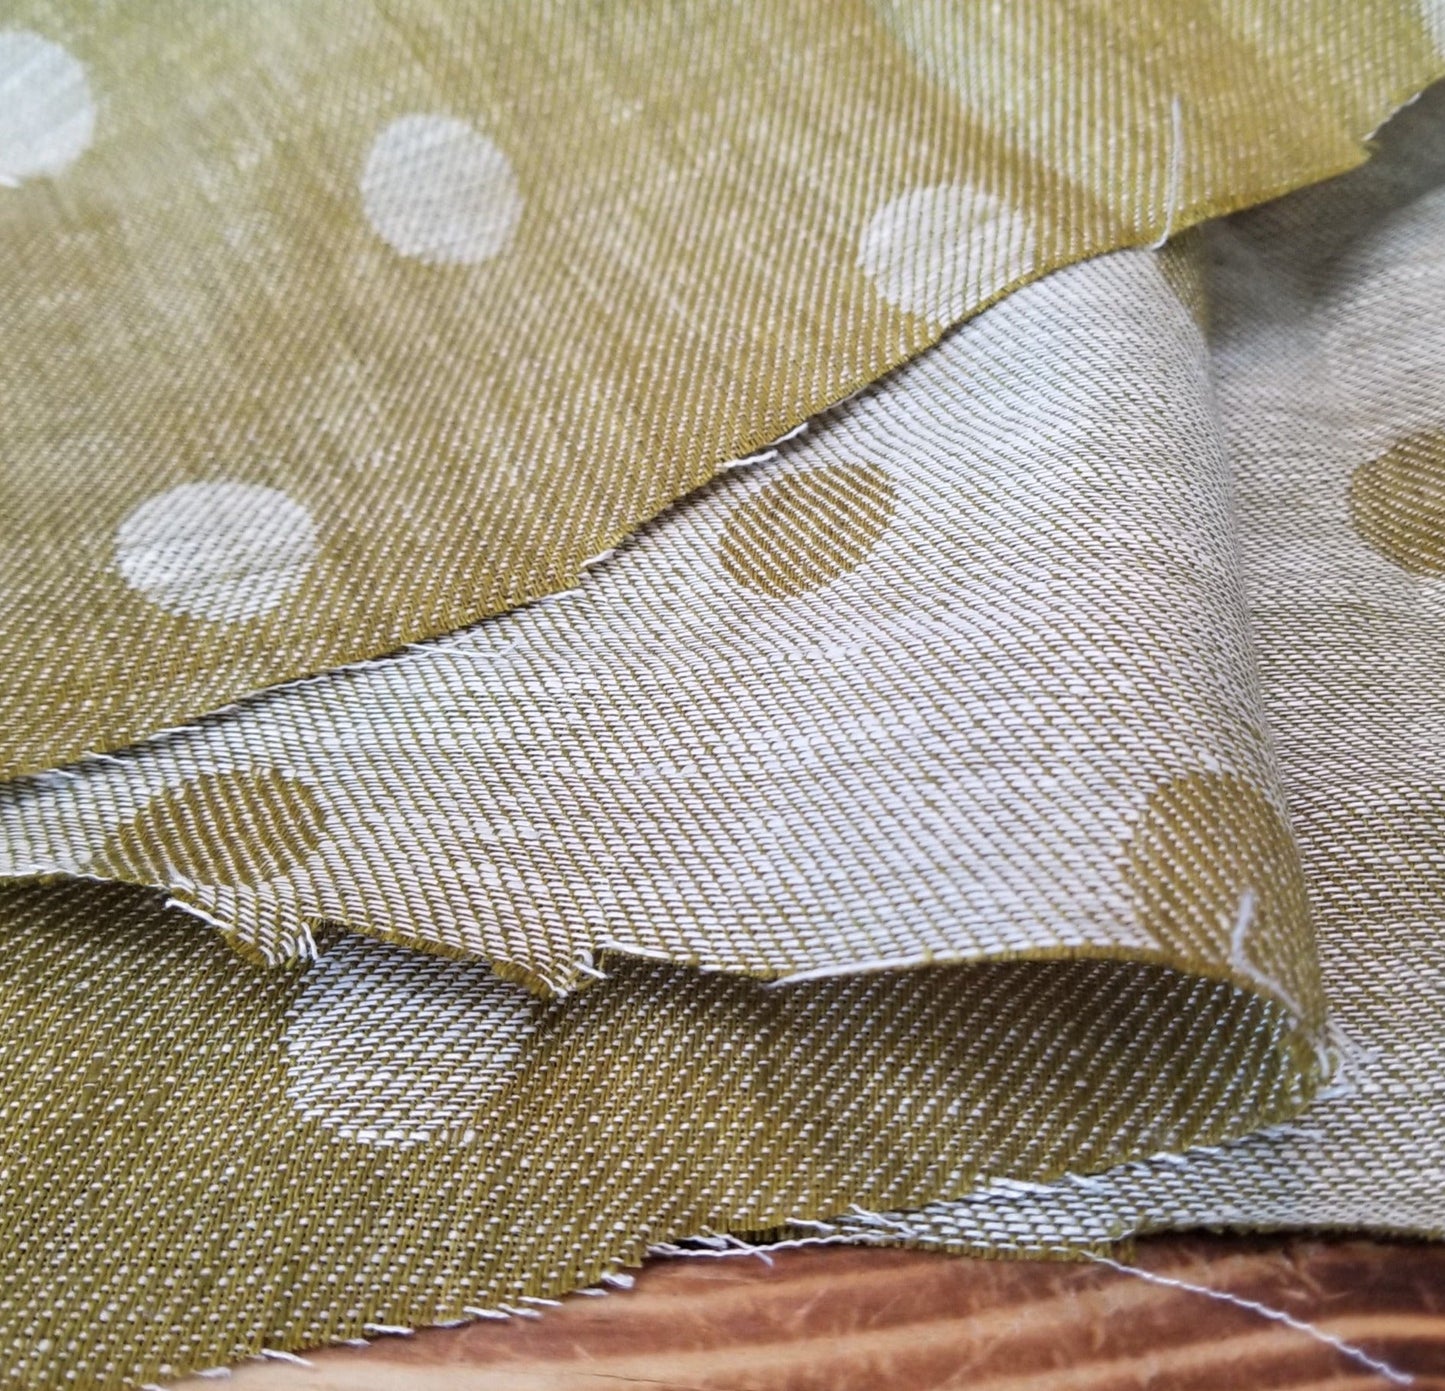 FABRIC SWATCH of Designer Deadstock Linen Reversible Dots Mustard Yellow and Ivory Jacquard Woven